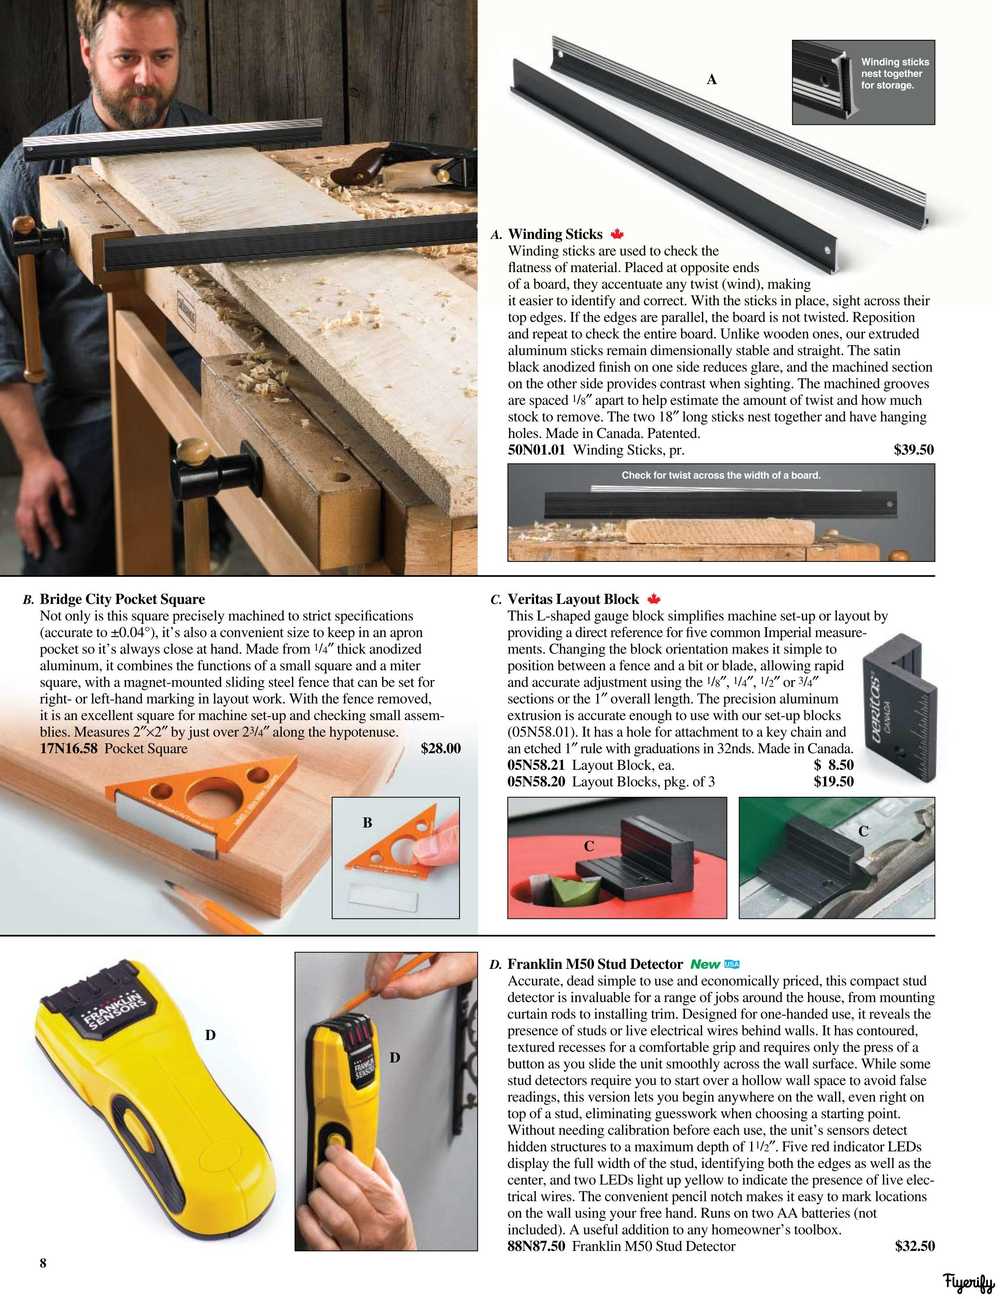 Lee Valley Winter 2020 Wood Working Catalogue 8 